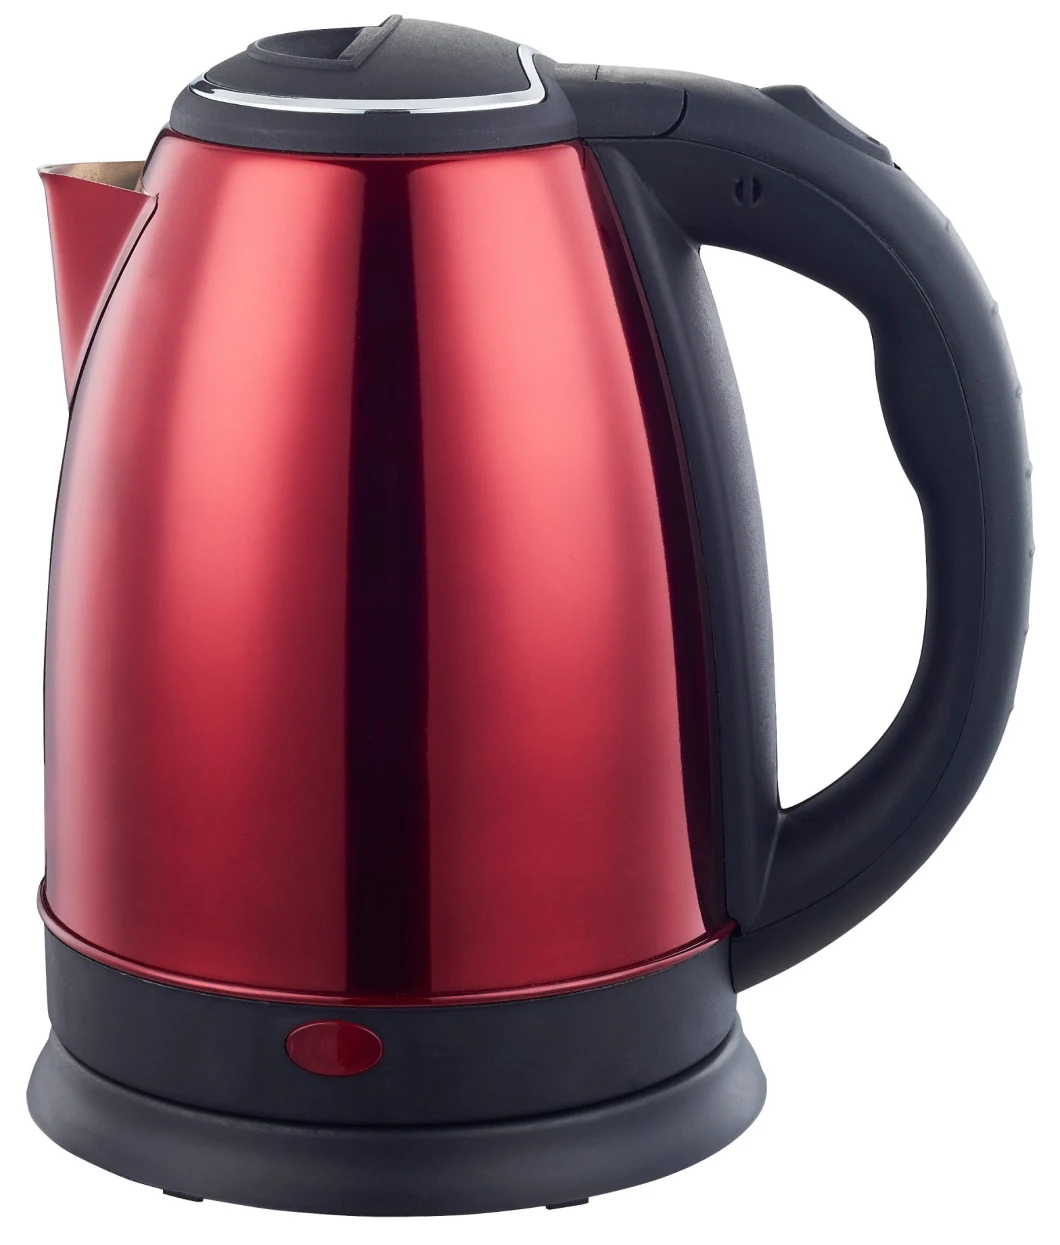 Hot-Selling Kettle 1.8L Polished Chassis 360 Rotating Stainless Steel Electric Kettle Automatically Power off